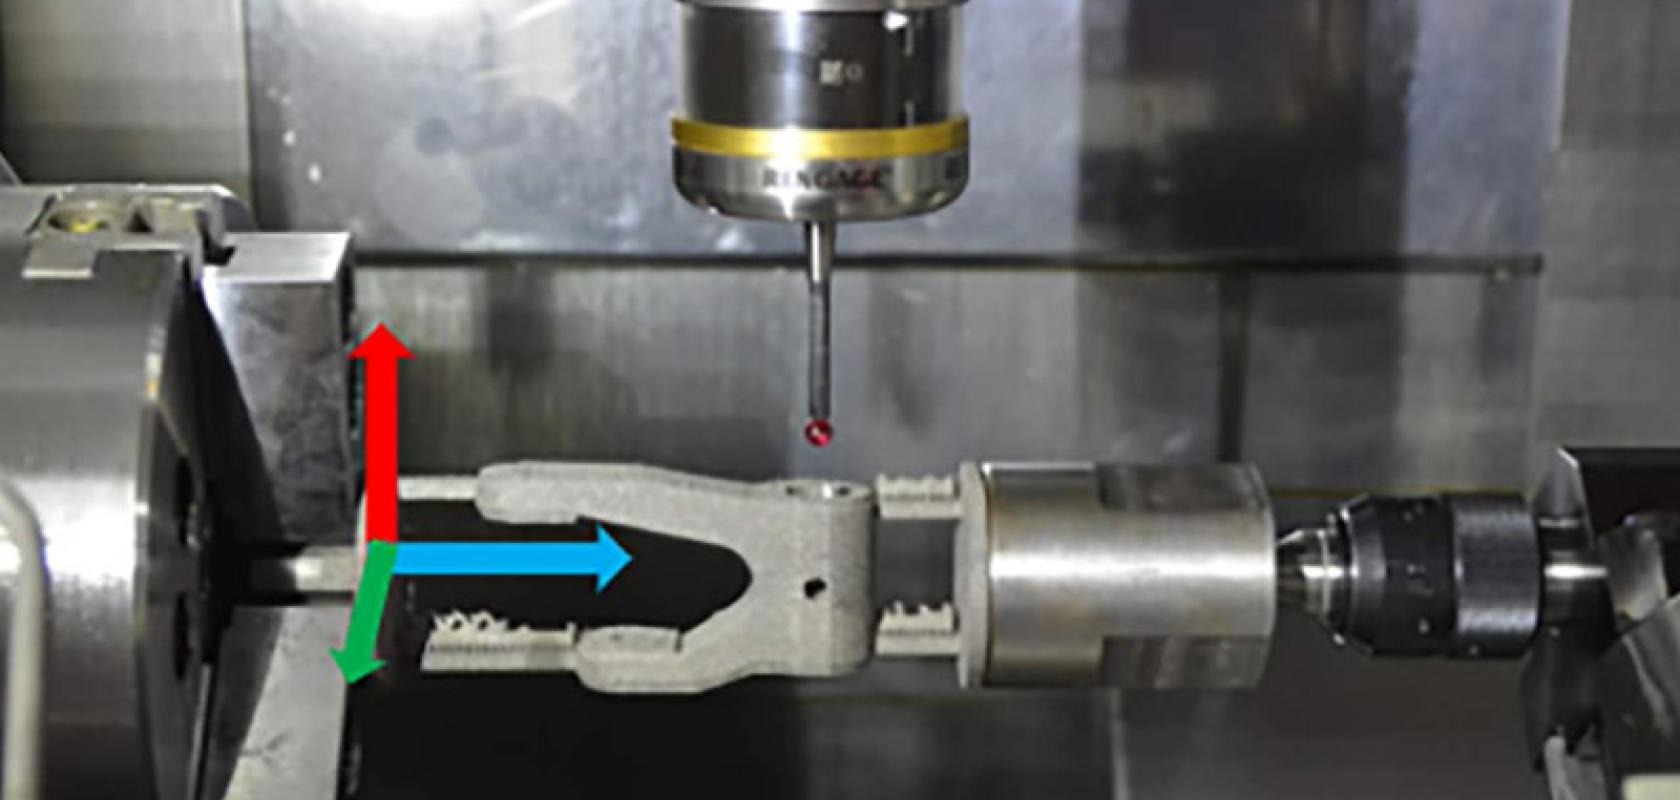 Automated quality control of 3D-printed parts can be performed during the finishing stage without removing the machine part from the manufacturing equipment